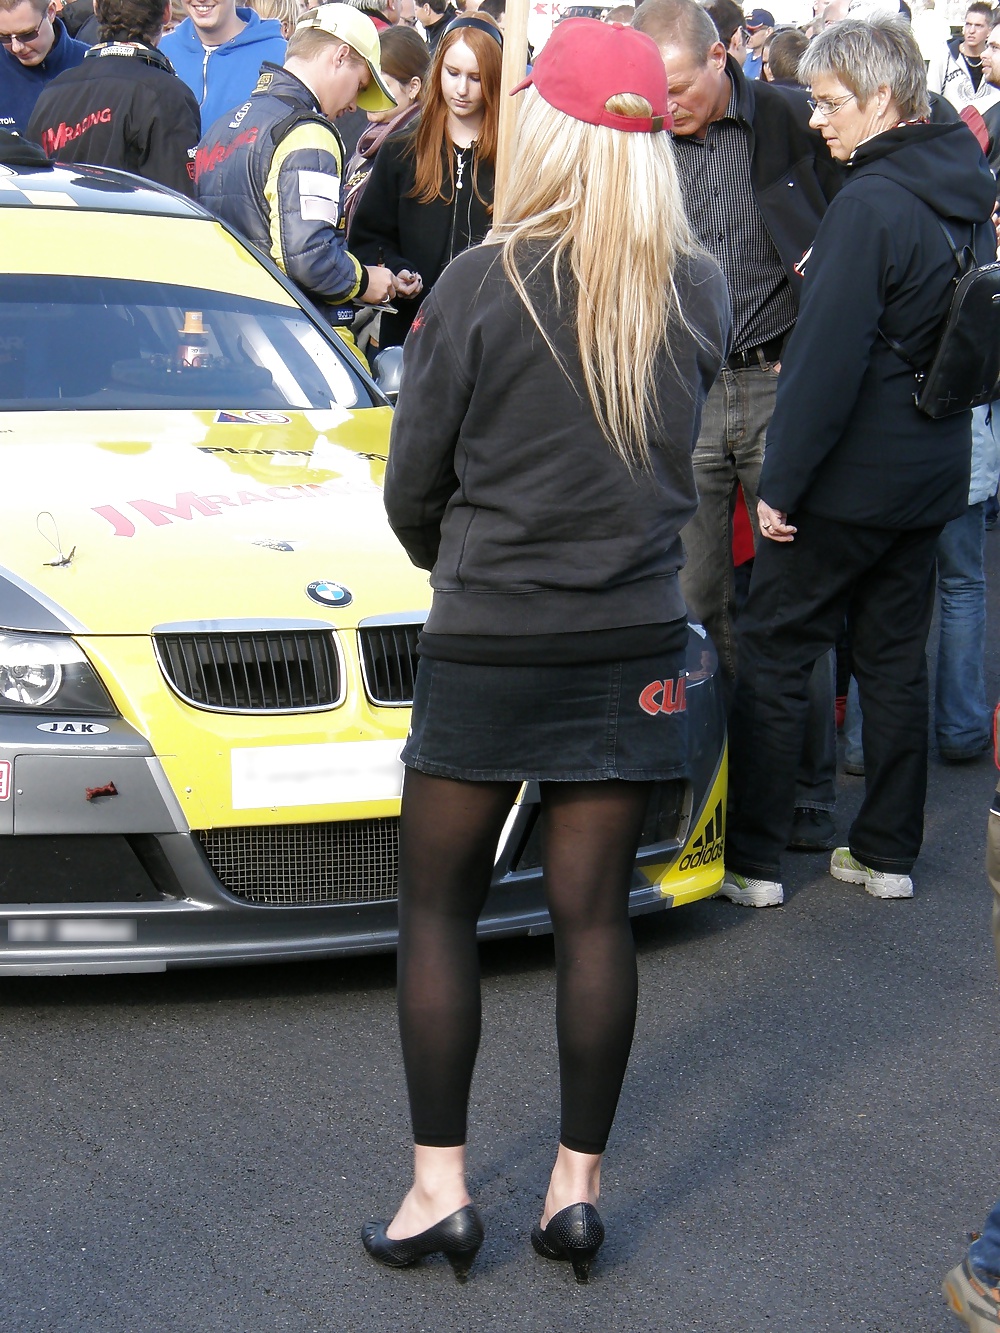 Hot chicks and grid girls I met at the speedway. #35194930